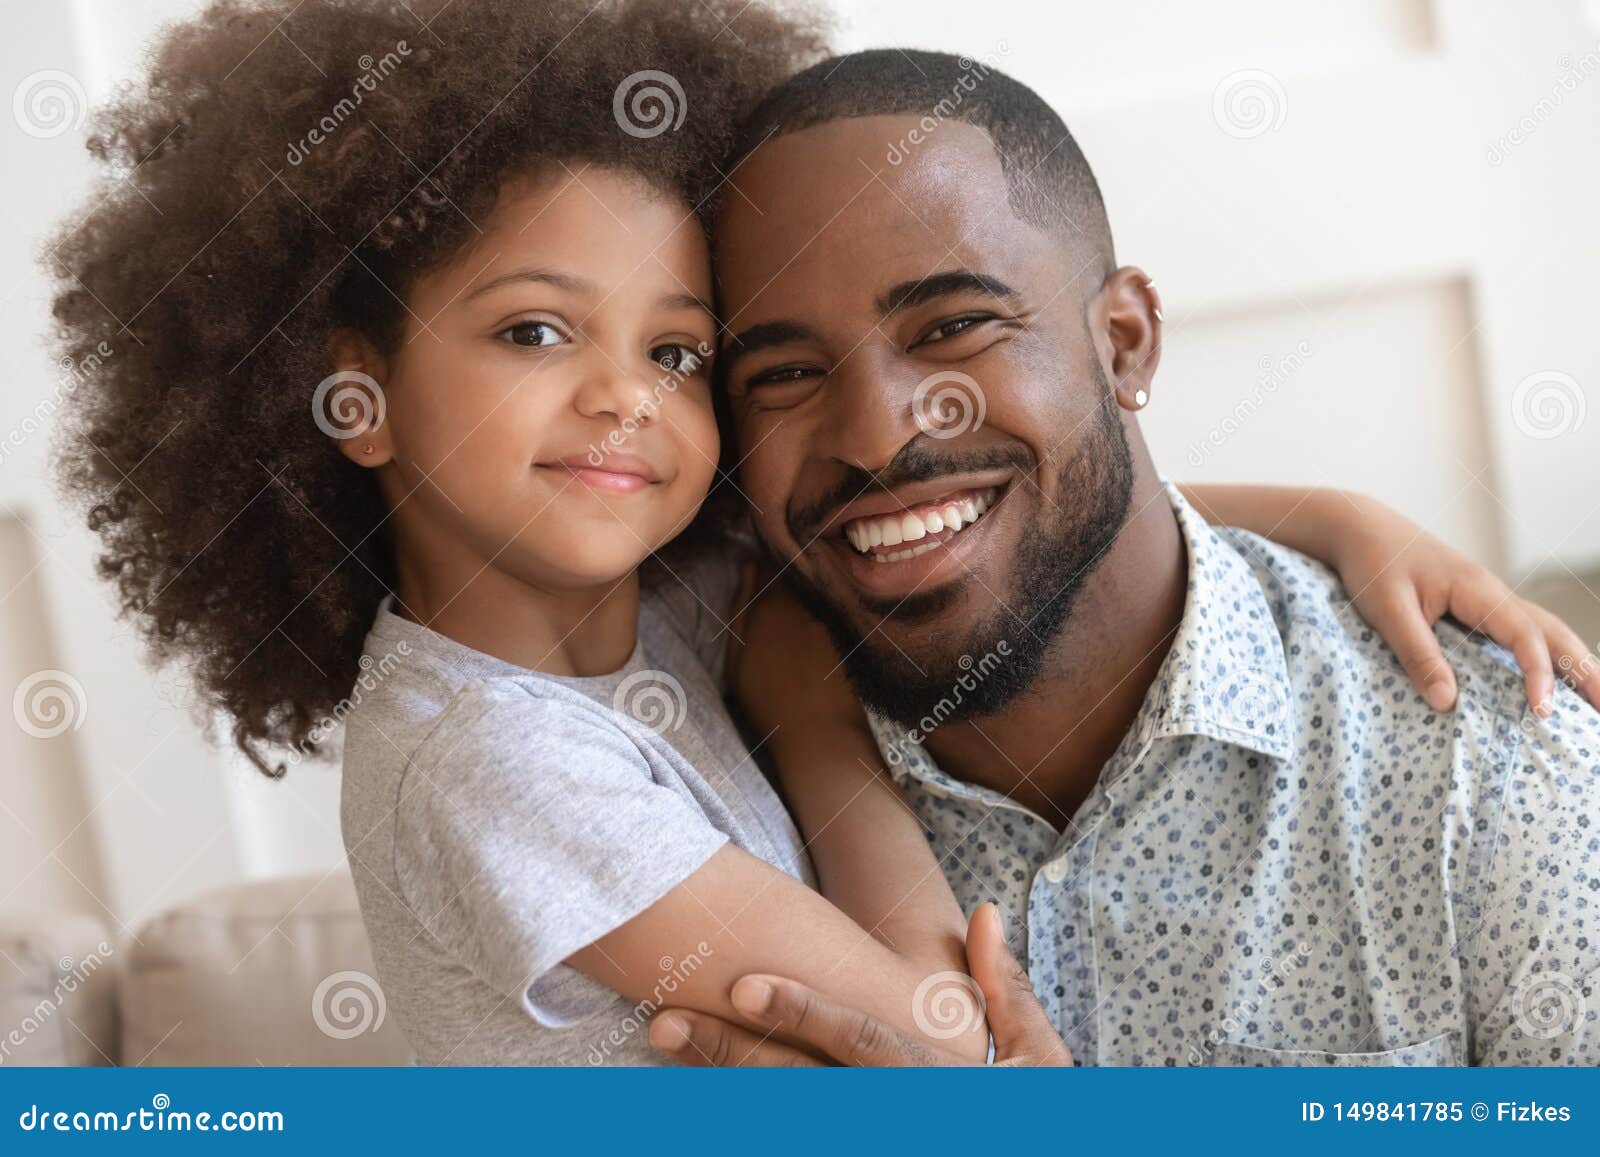 real black daddy daughter